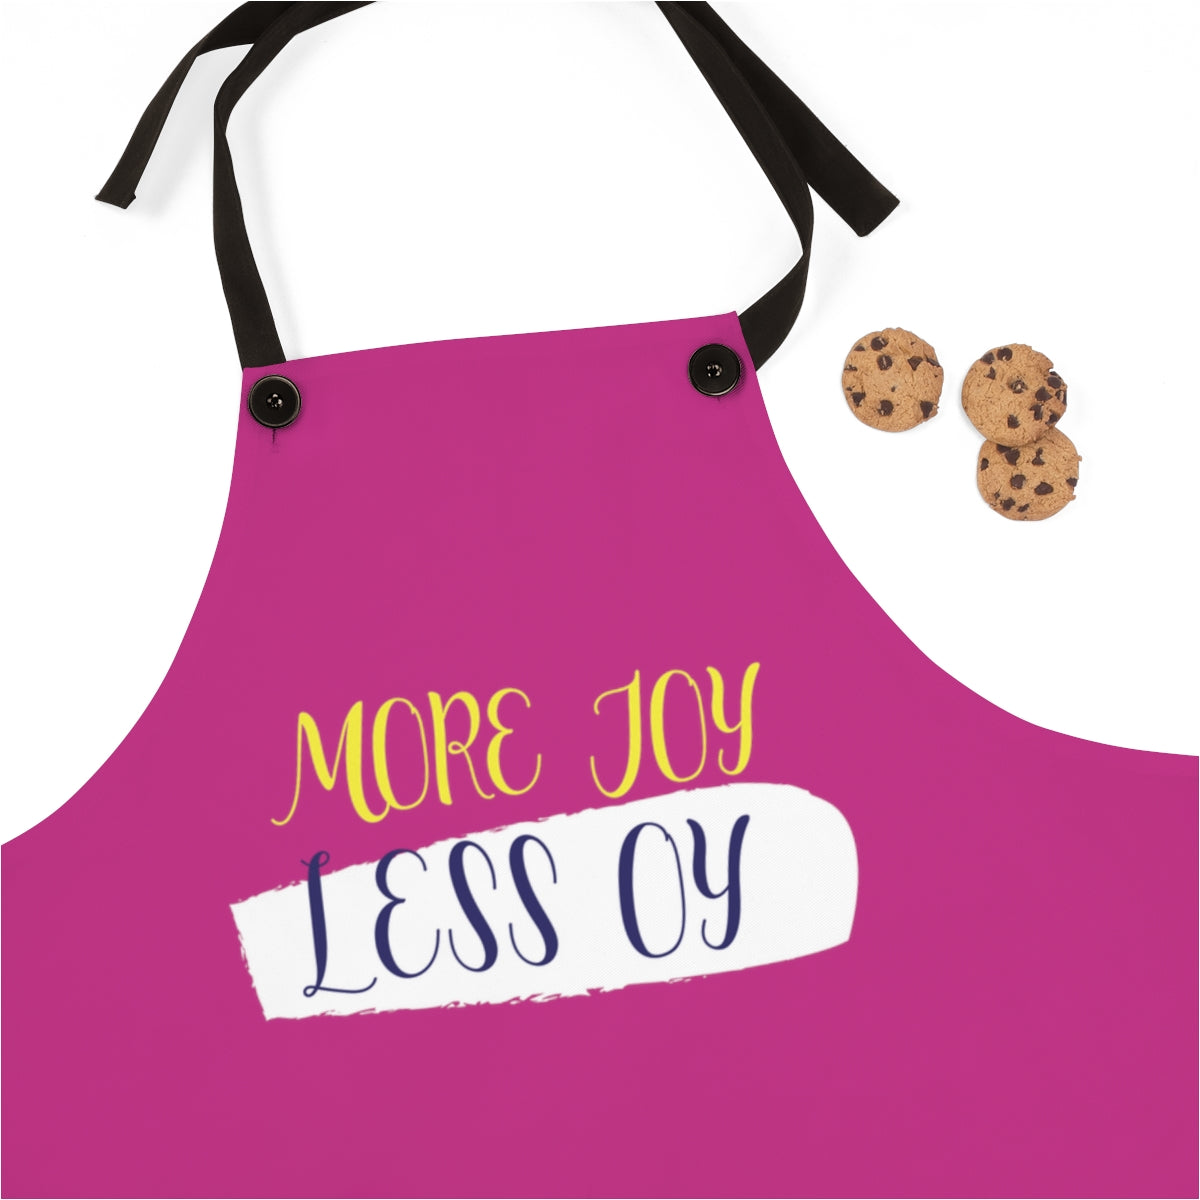 Portuguese Mom Apron Whats Your Superpower Funny Apron -  Israel